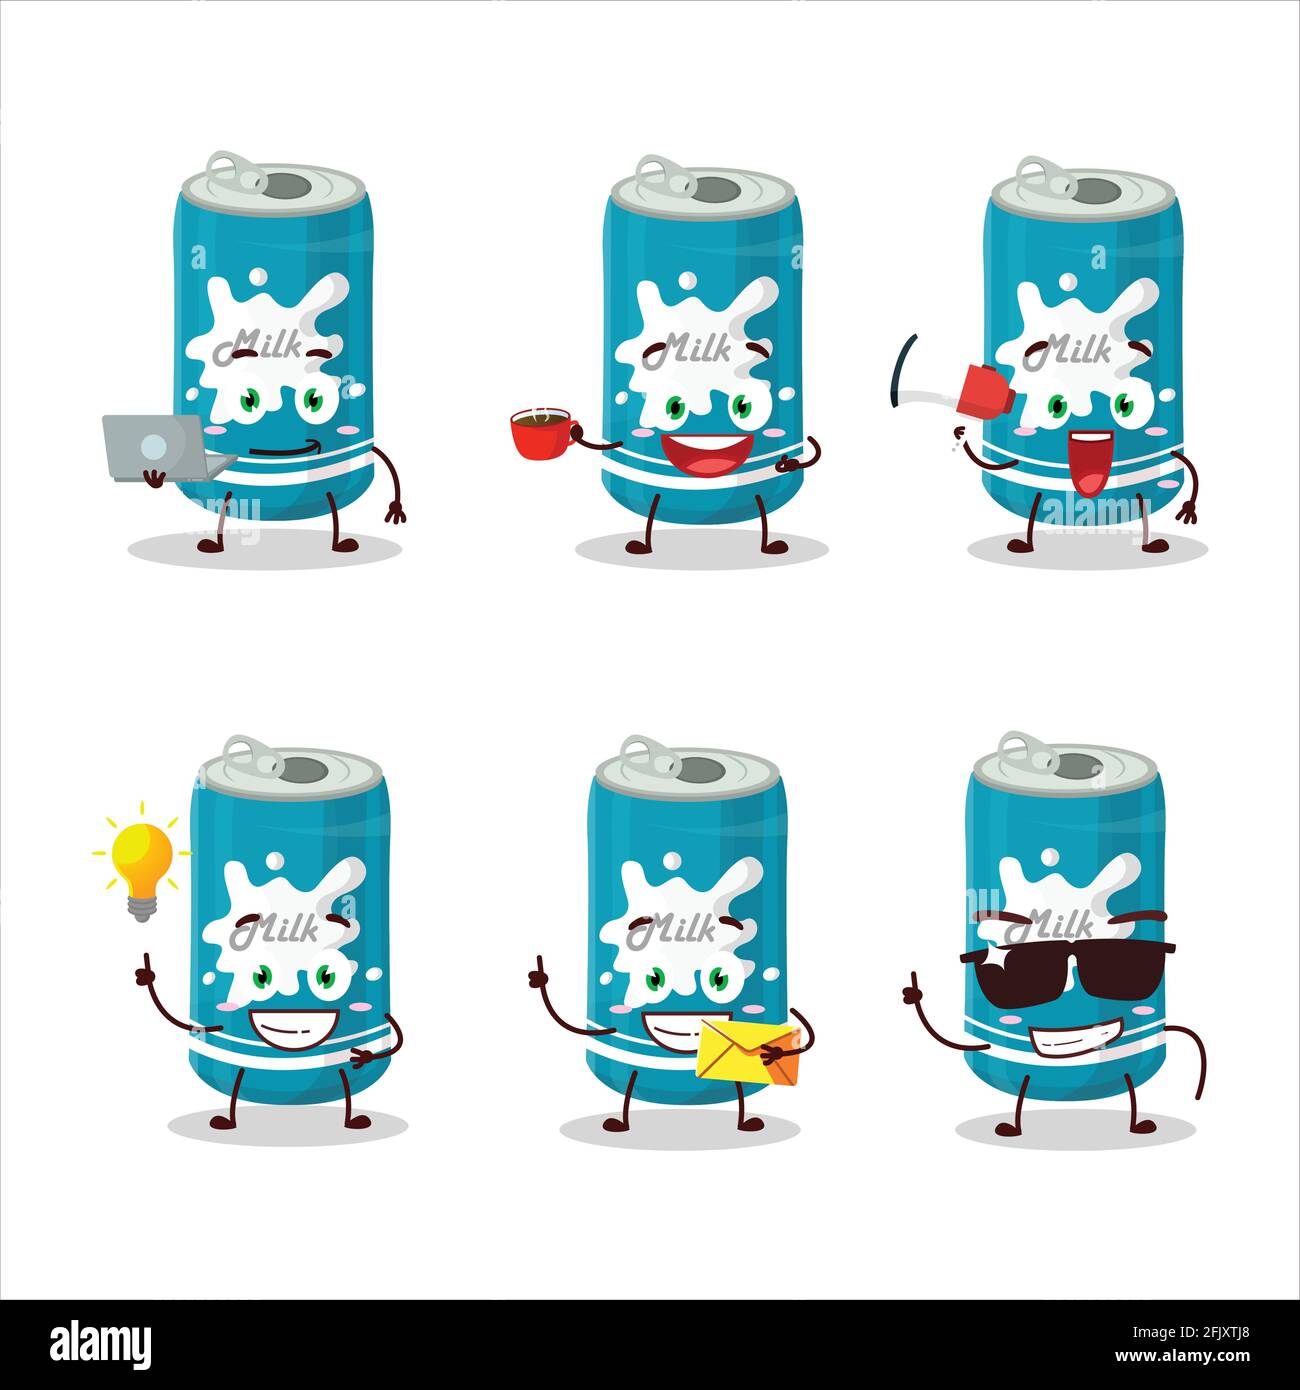 Milk can cartoon character with various types of business emoticons ...